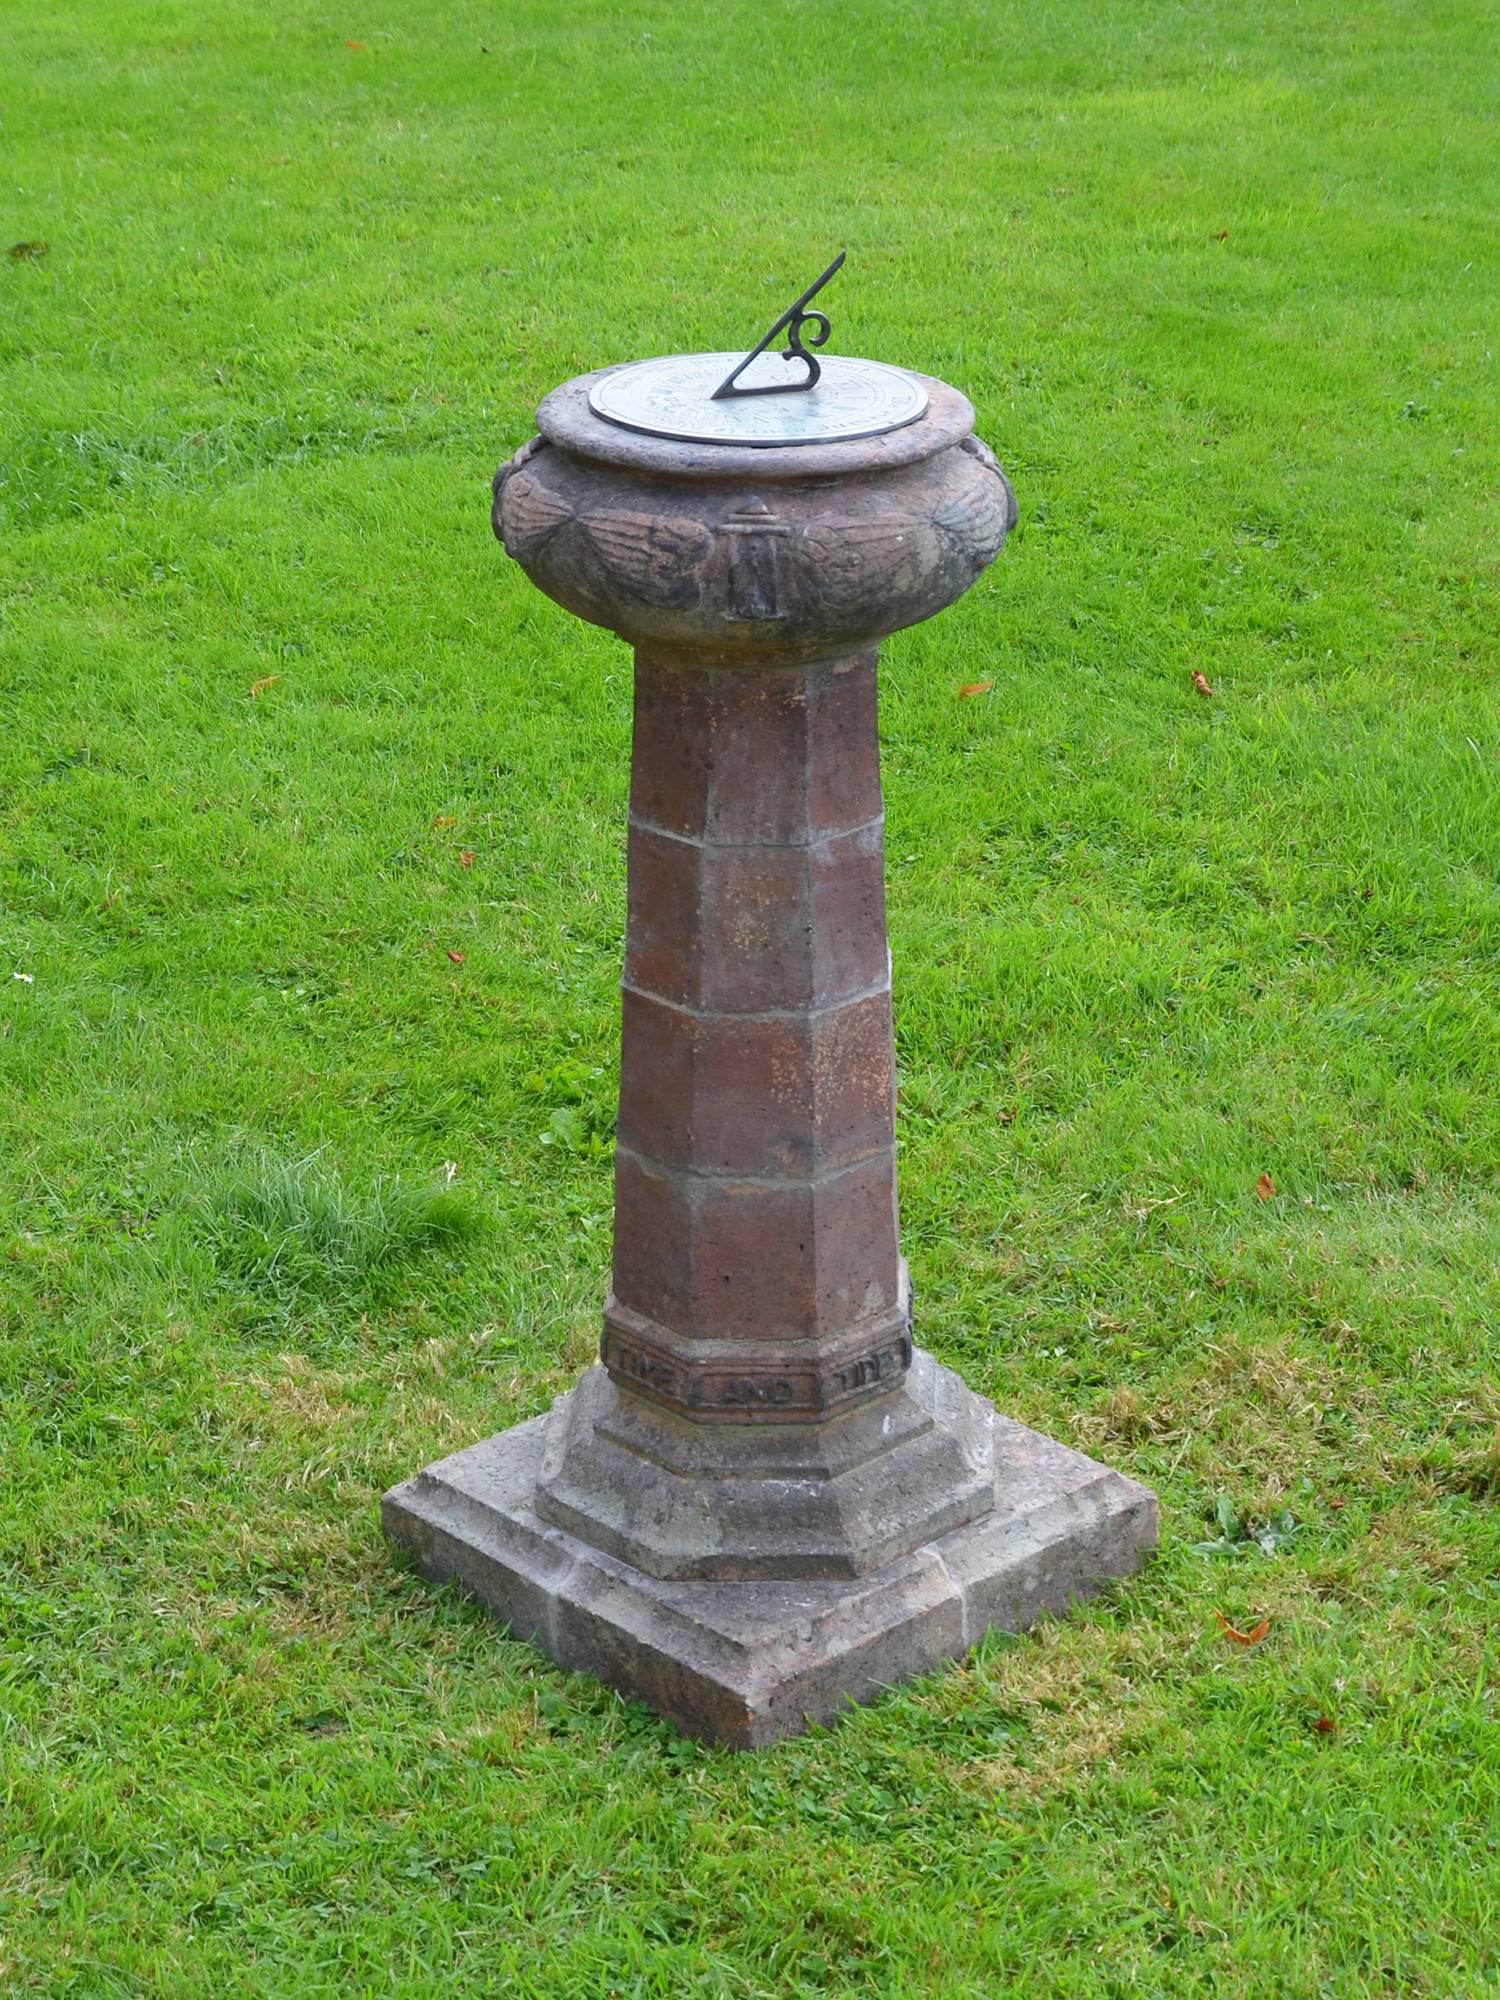 Of pillar form with inscription ‘Time and tide wait for no man,’ The four sectioned column supporting a circular bulbous cap decorated with hour-glass and wing repeated motif, supporting a circular sundial plate.